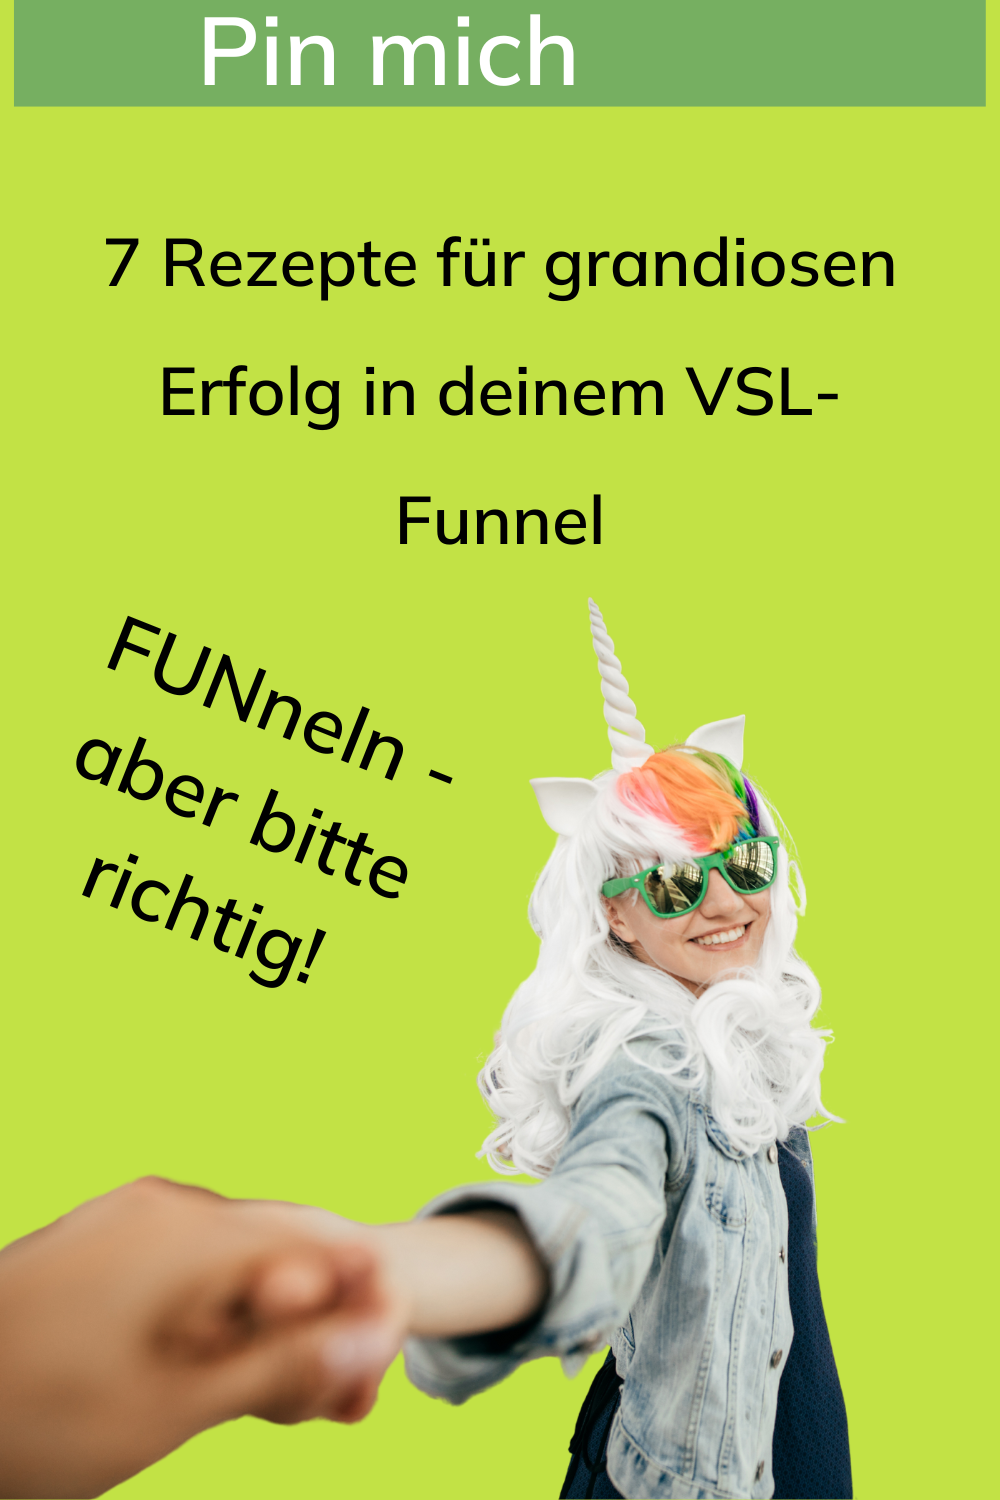 Funnel Anleitung A/B Tests auf Landingpages & in e-mails